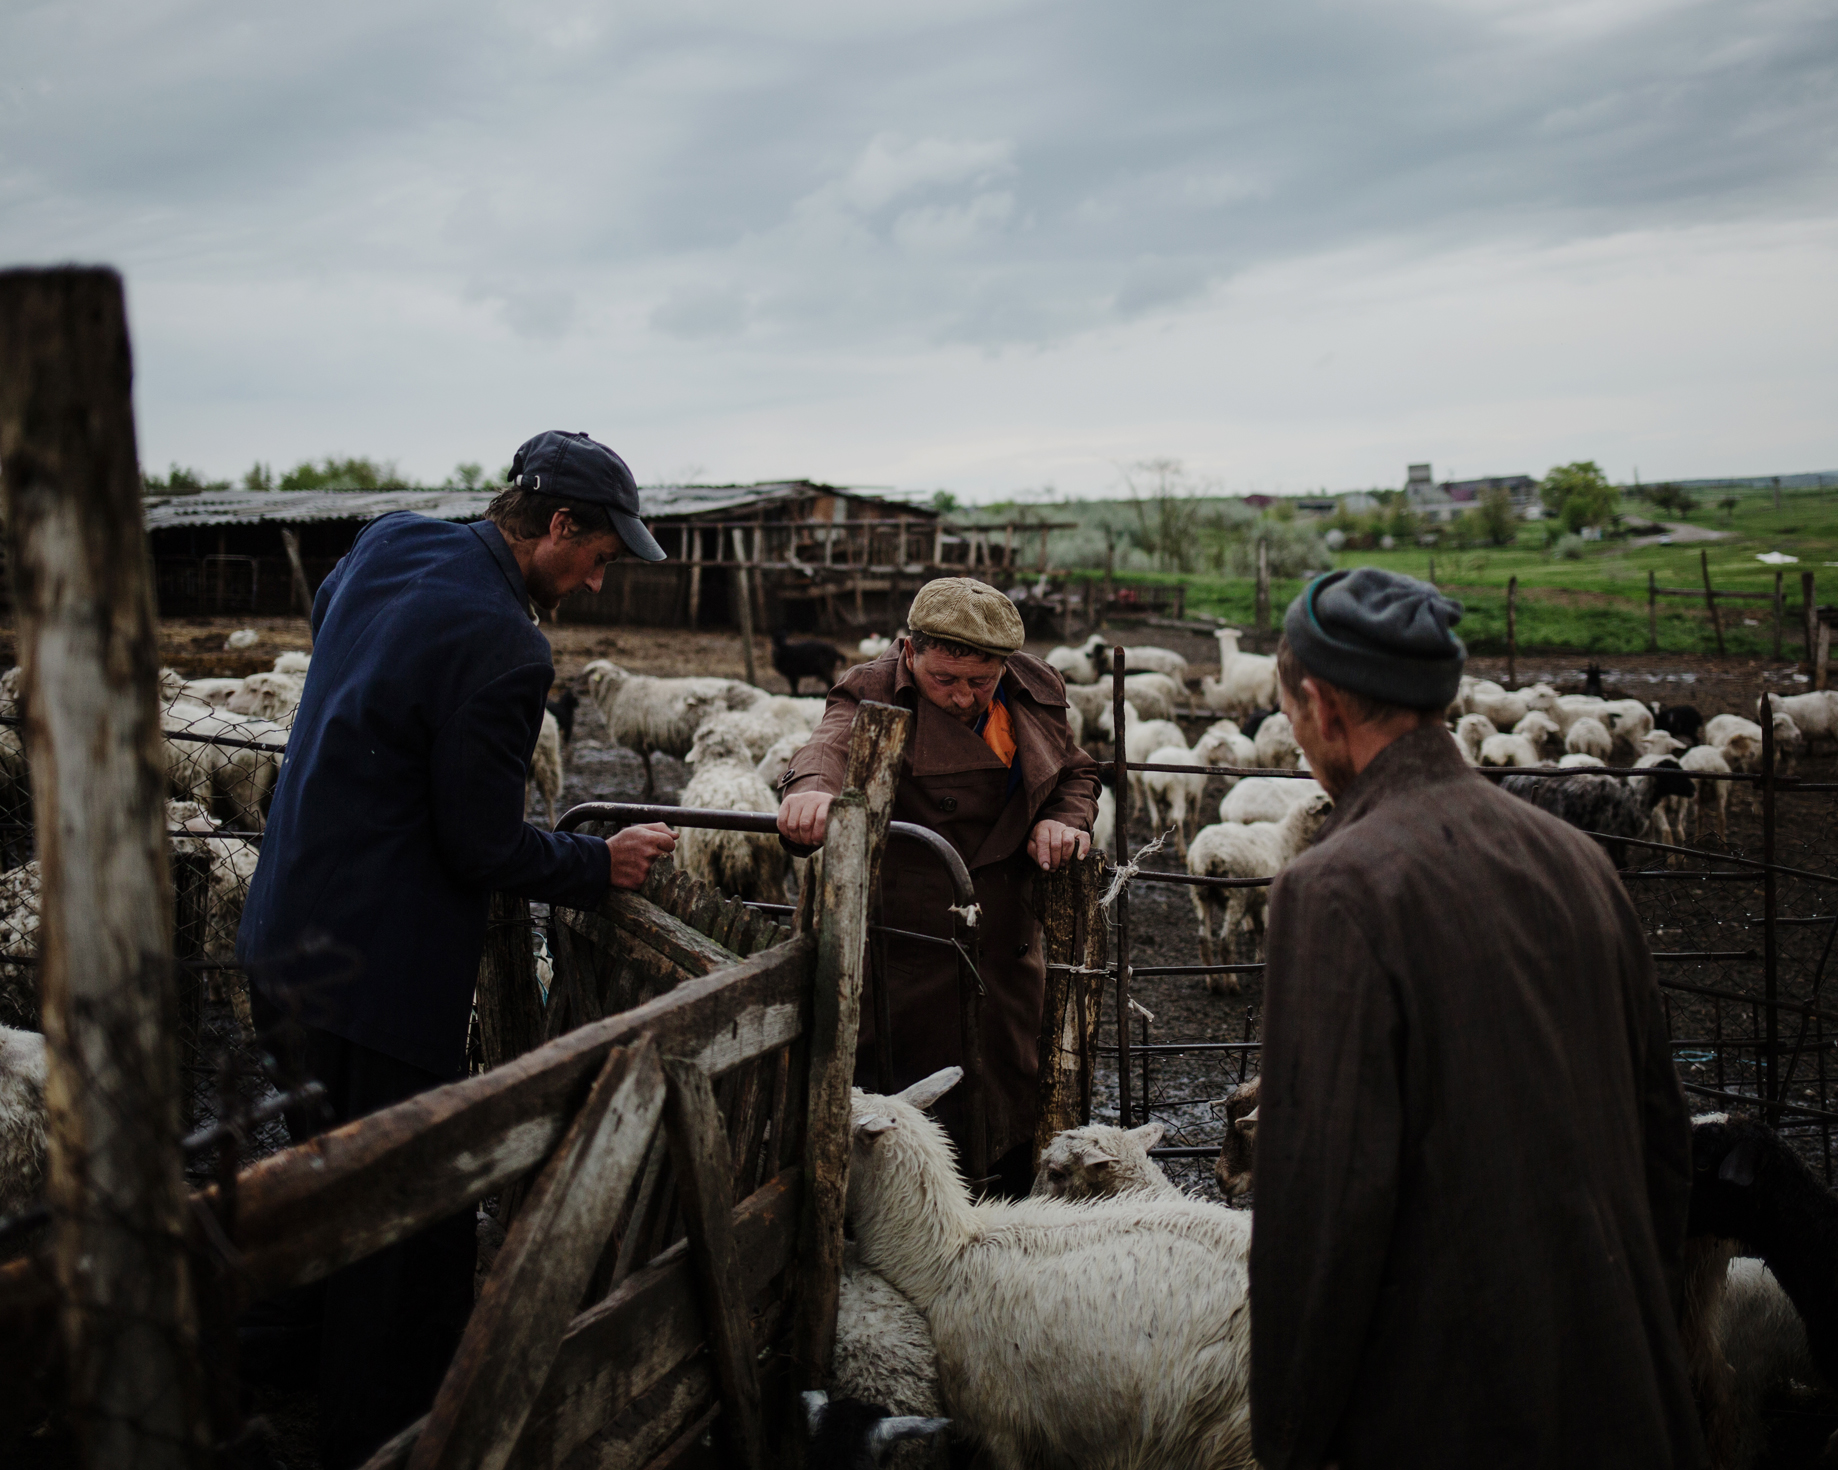  Beshgioz - Workers from a farm gather the sheep and the goats at the end of the day. 